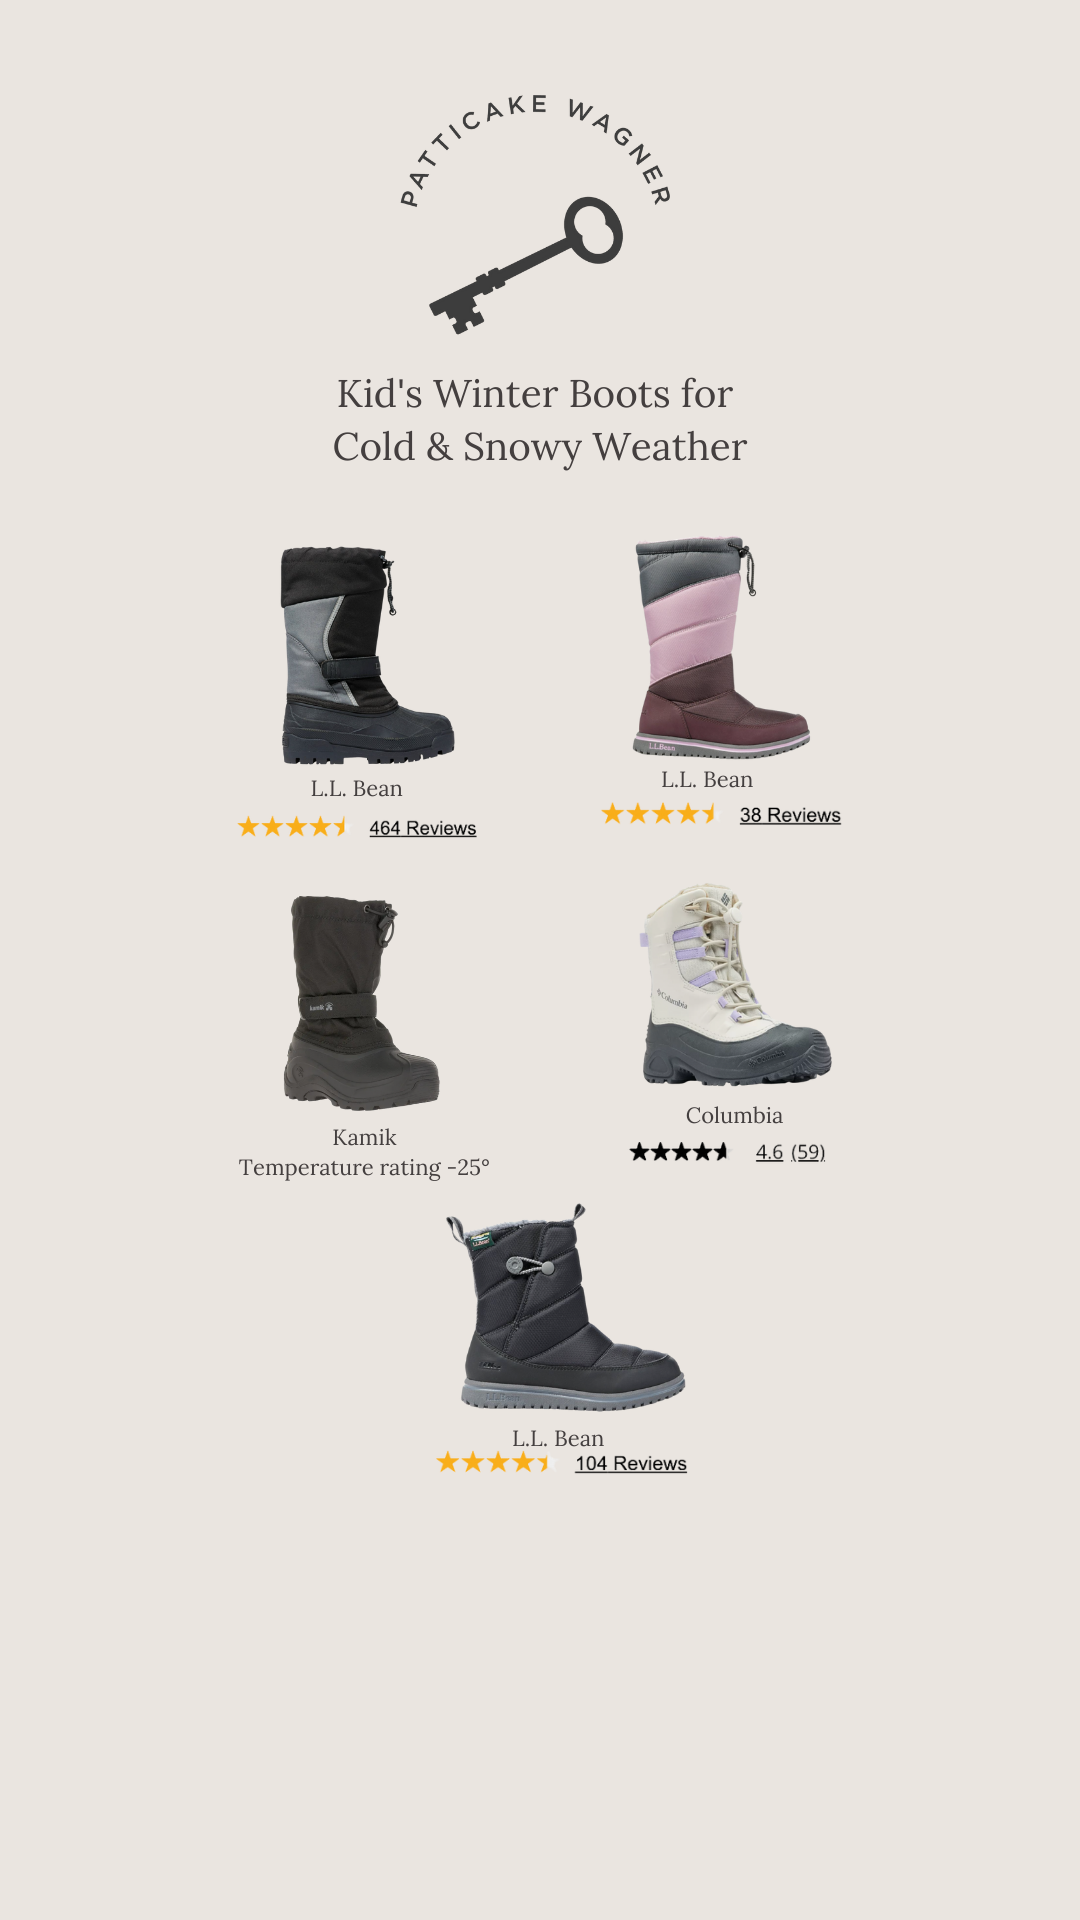 Warmest Winter Boots for Cold & Snowy Climates - Patticake Wagner